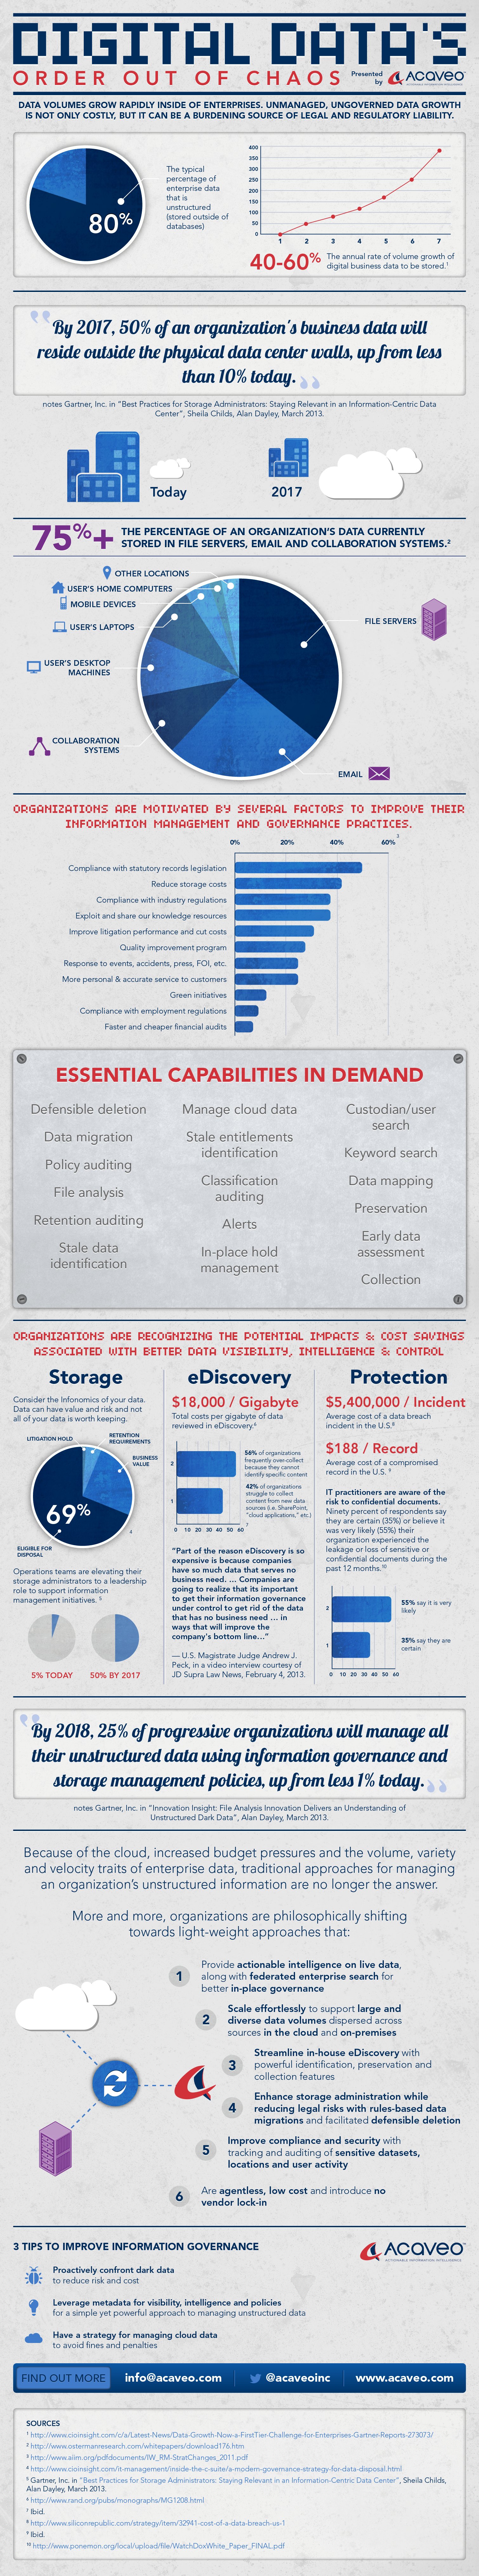 acaveo_vertical-infographic2013_vf2-med